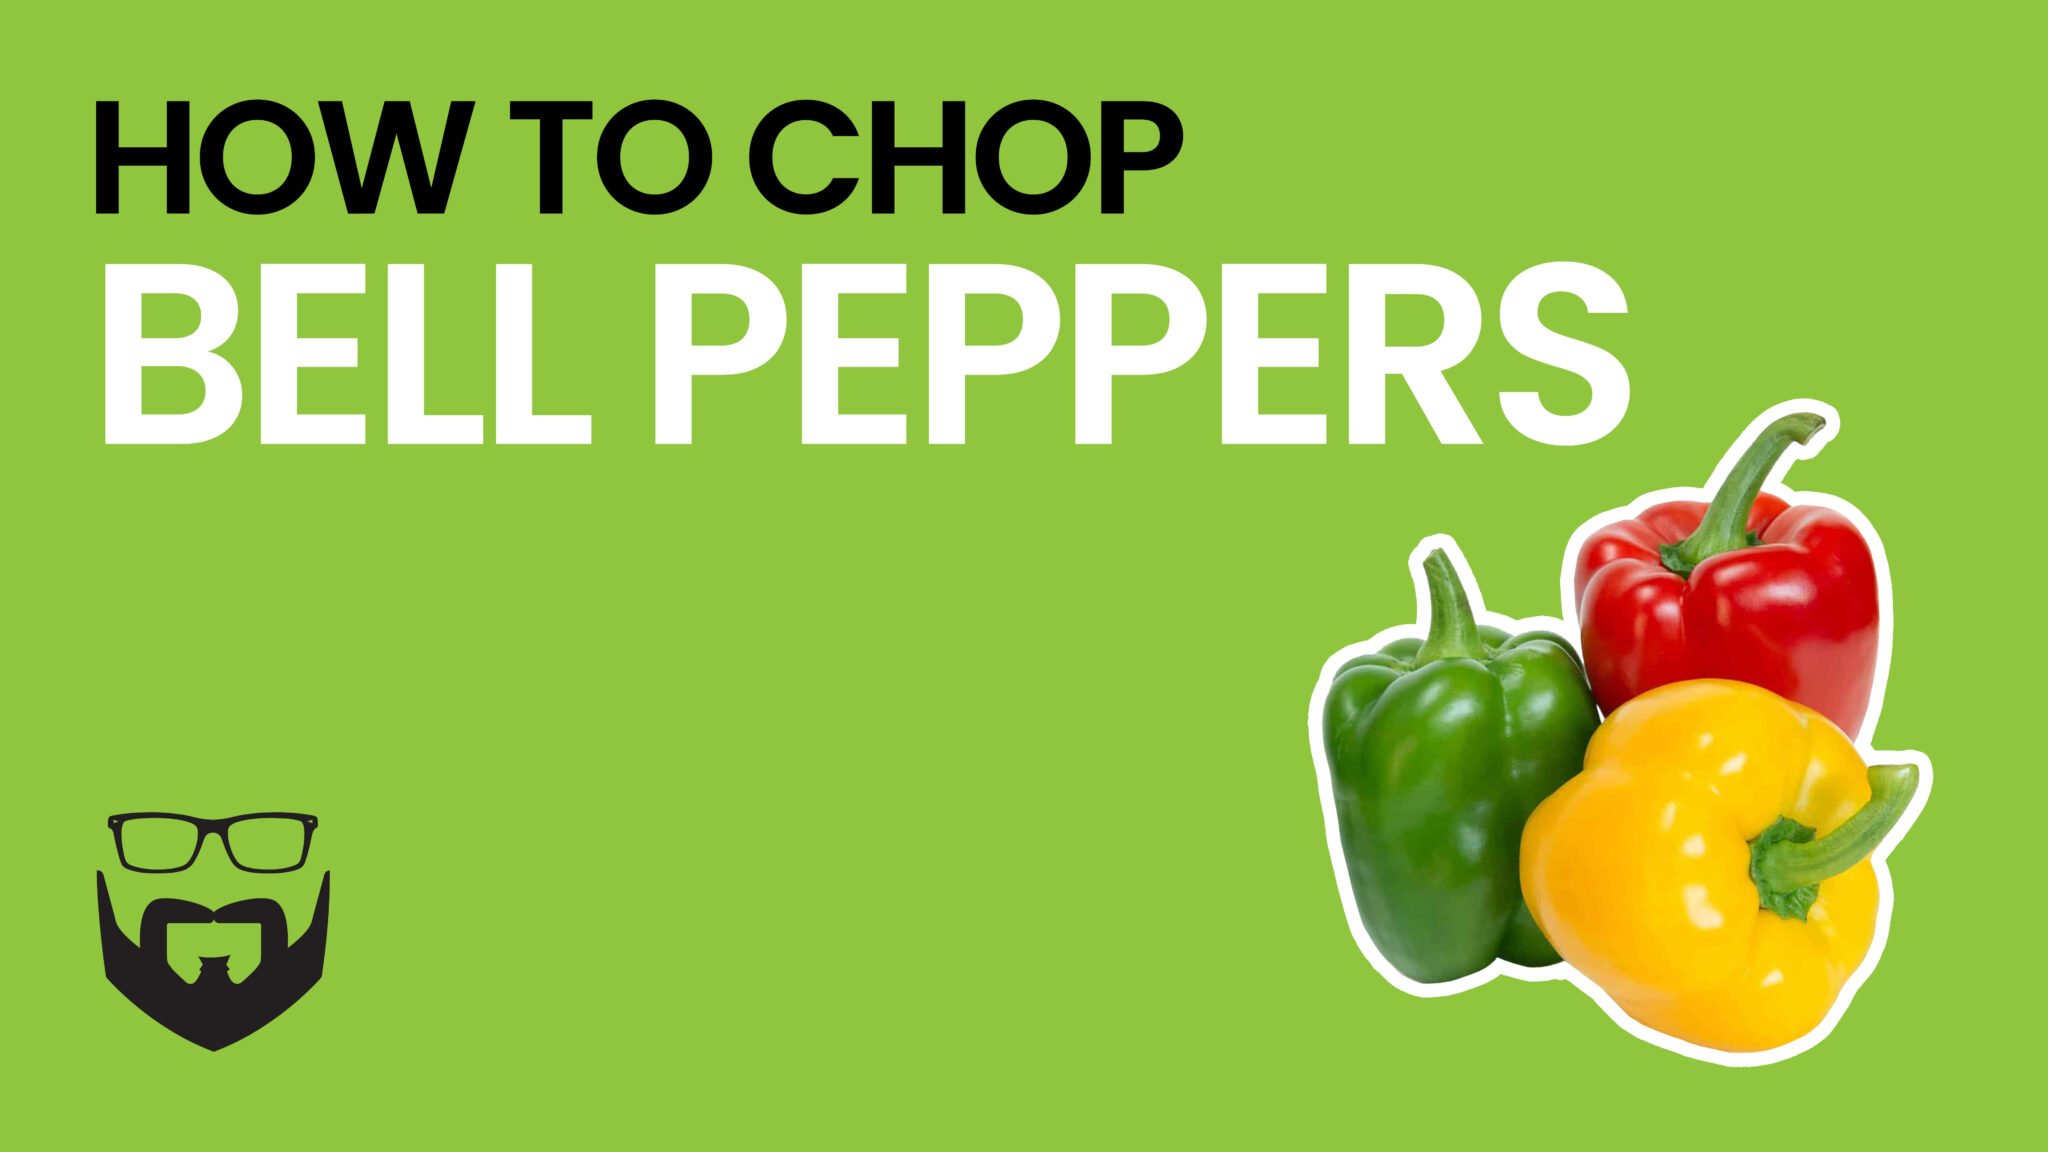 How to Chop & Dice Bell Peppers Video - Green